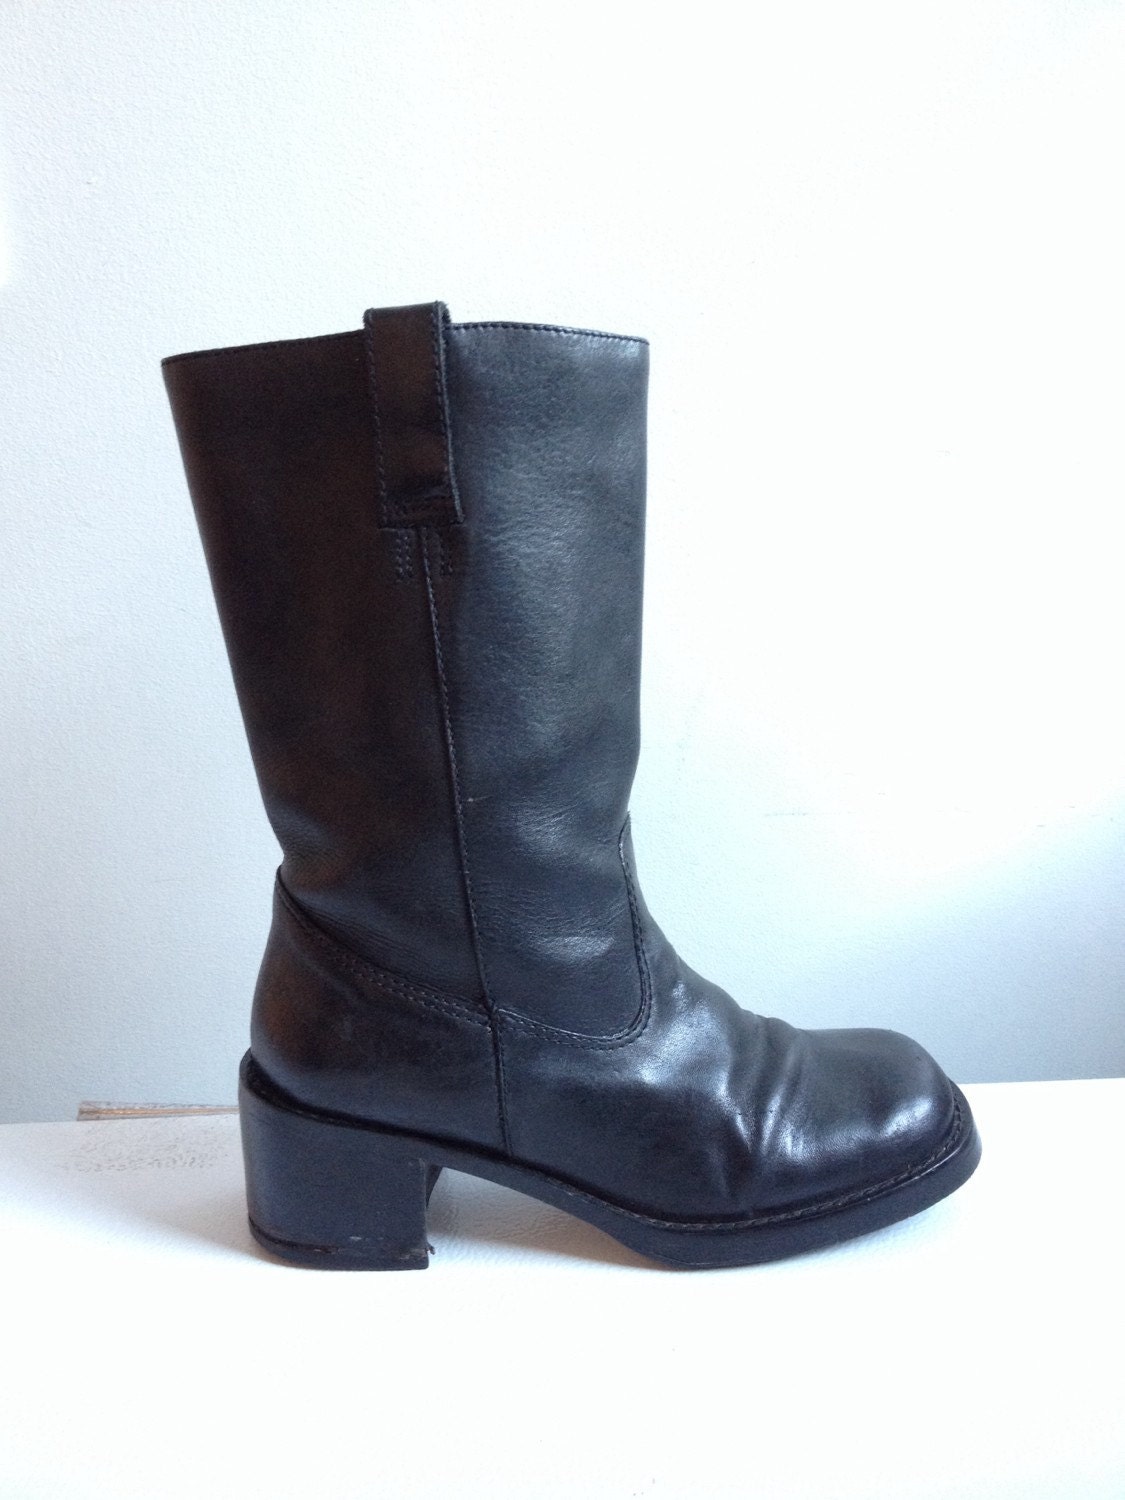 70s Frye Style Campus Boots Size 37 Black Leather Boots Moto